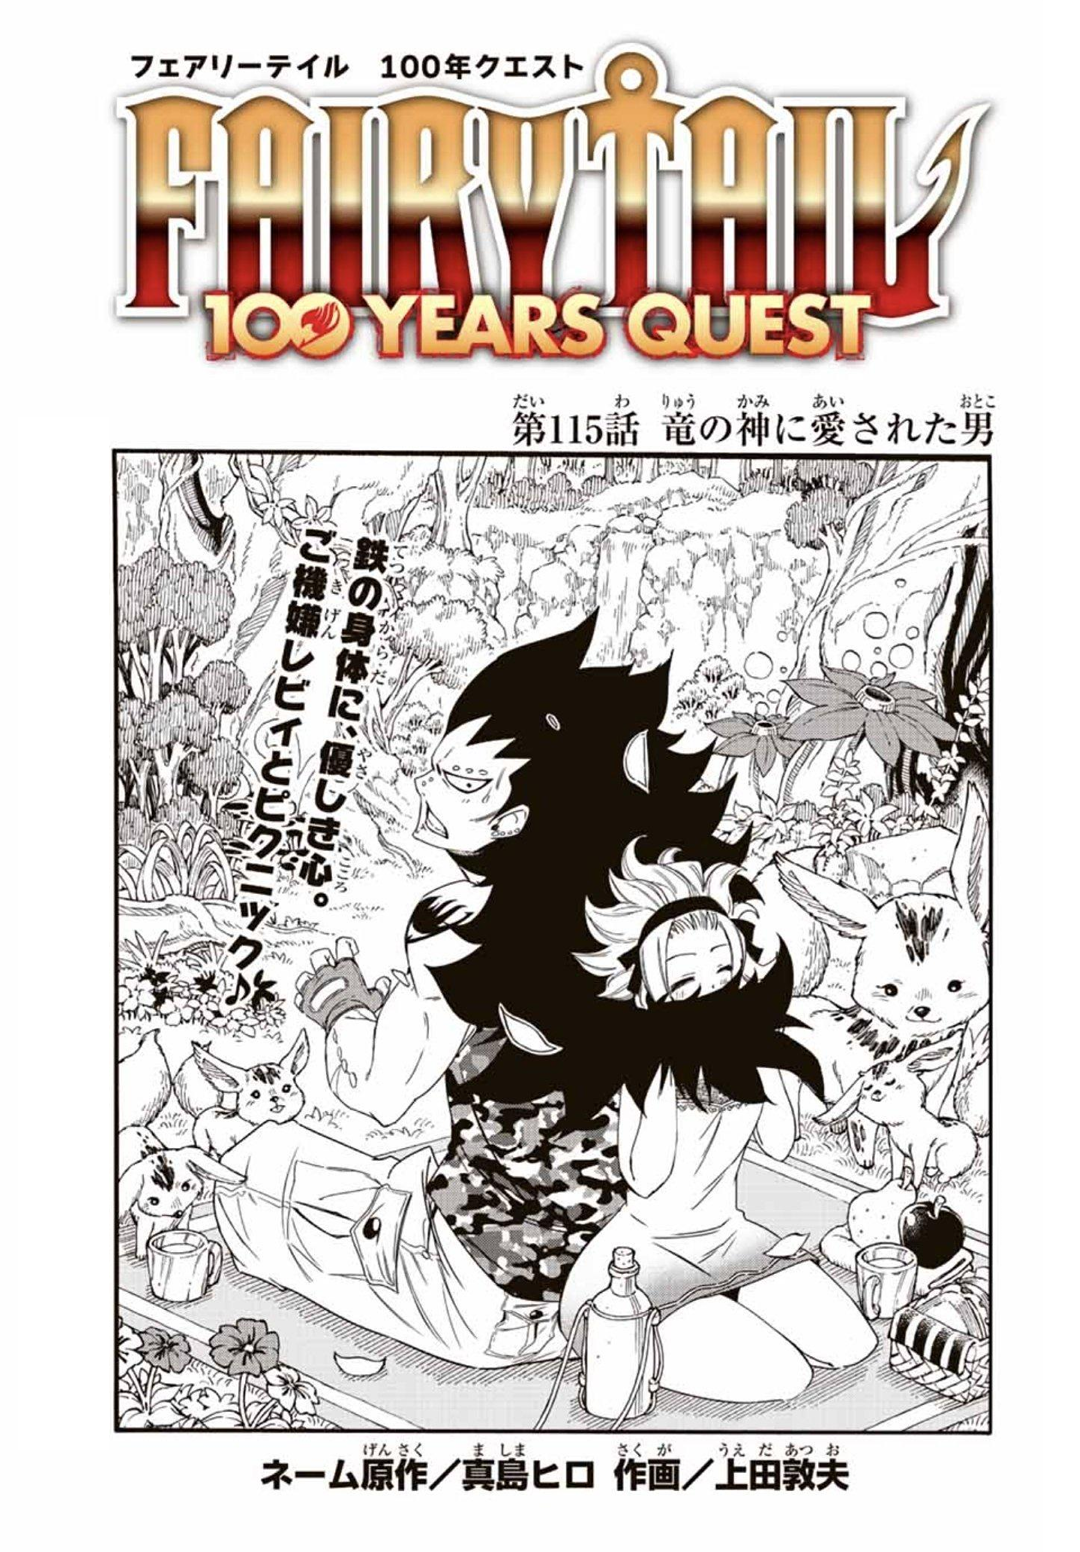 Fairy Tail Manga Review – Legend of the Golden Wind